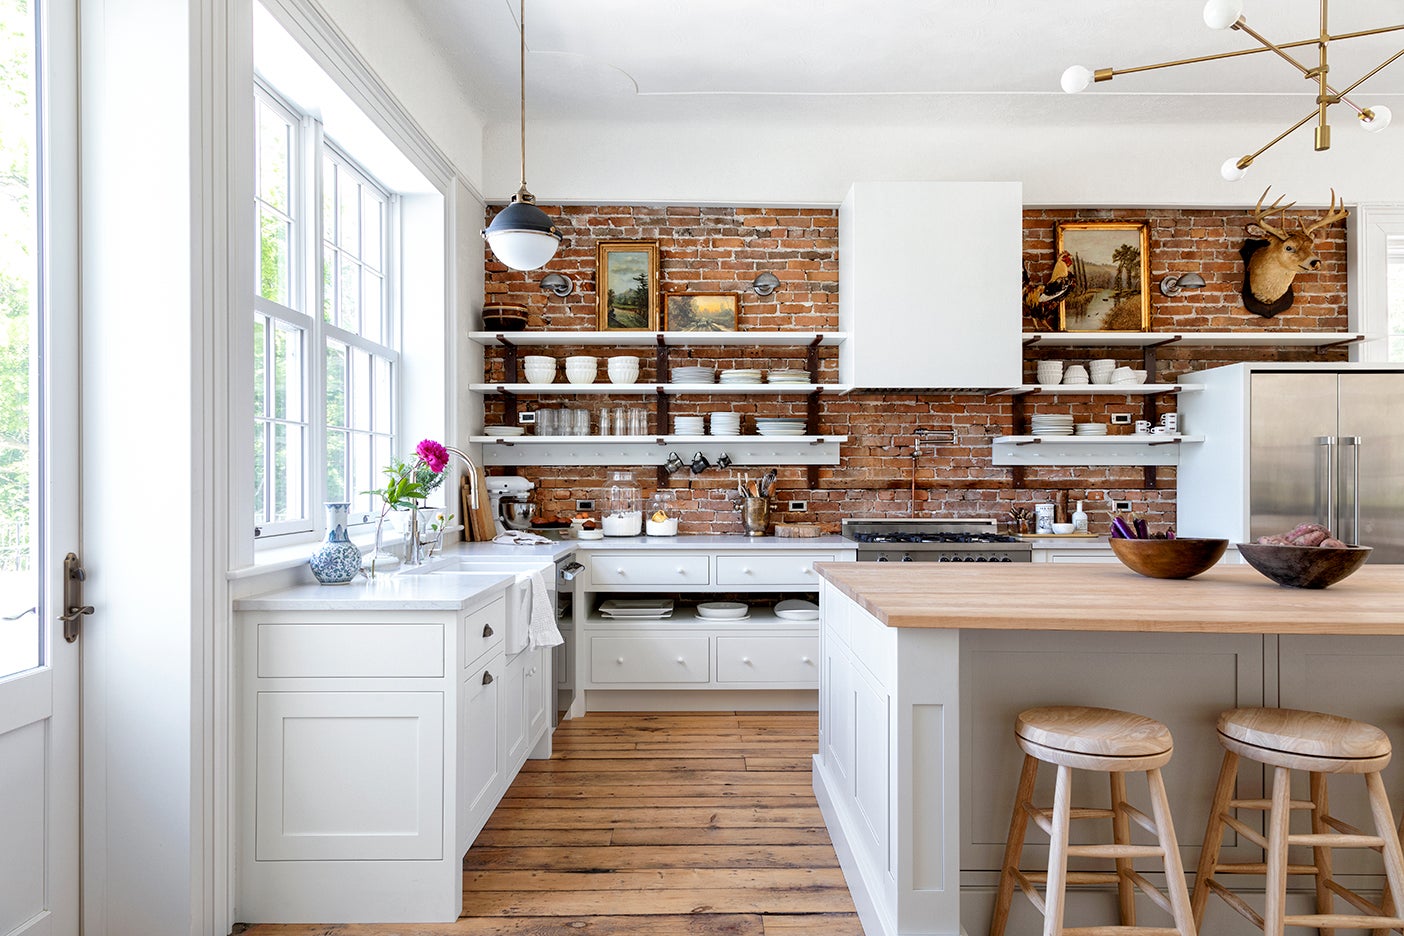 White kitchen with exposed brick walls